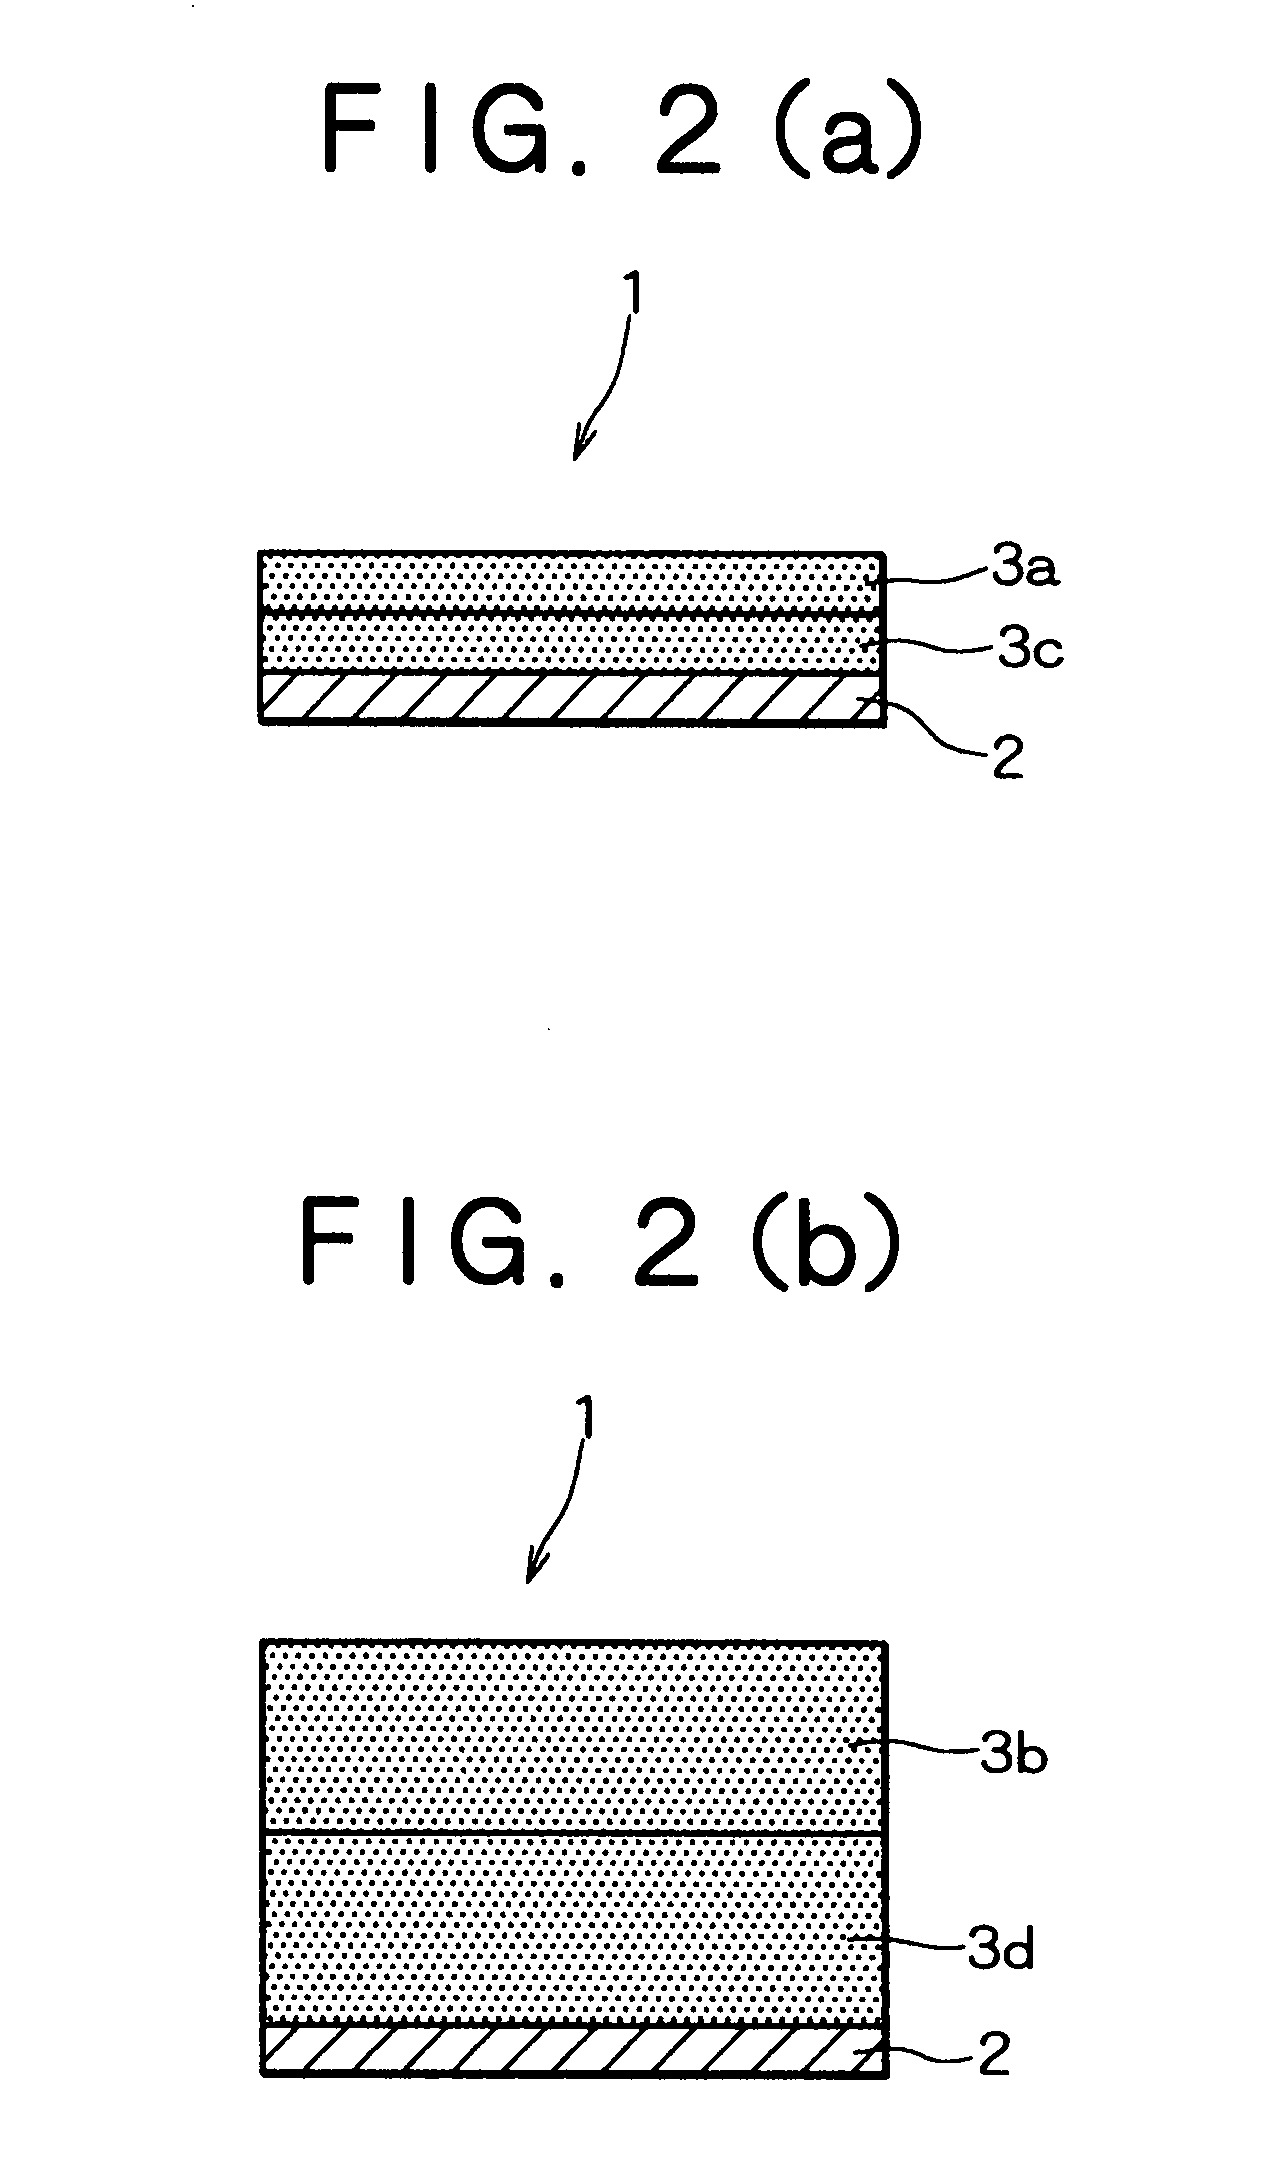 Foamed resin laminate sound insulation board and method for manufacturing the same